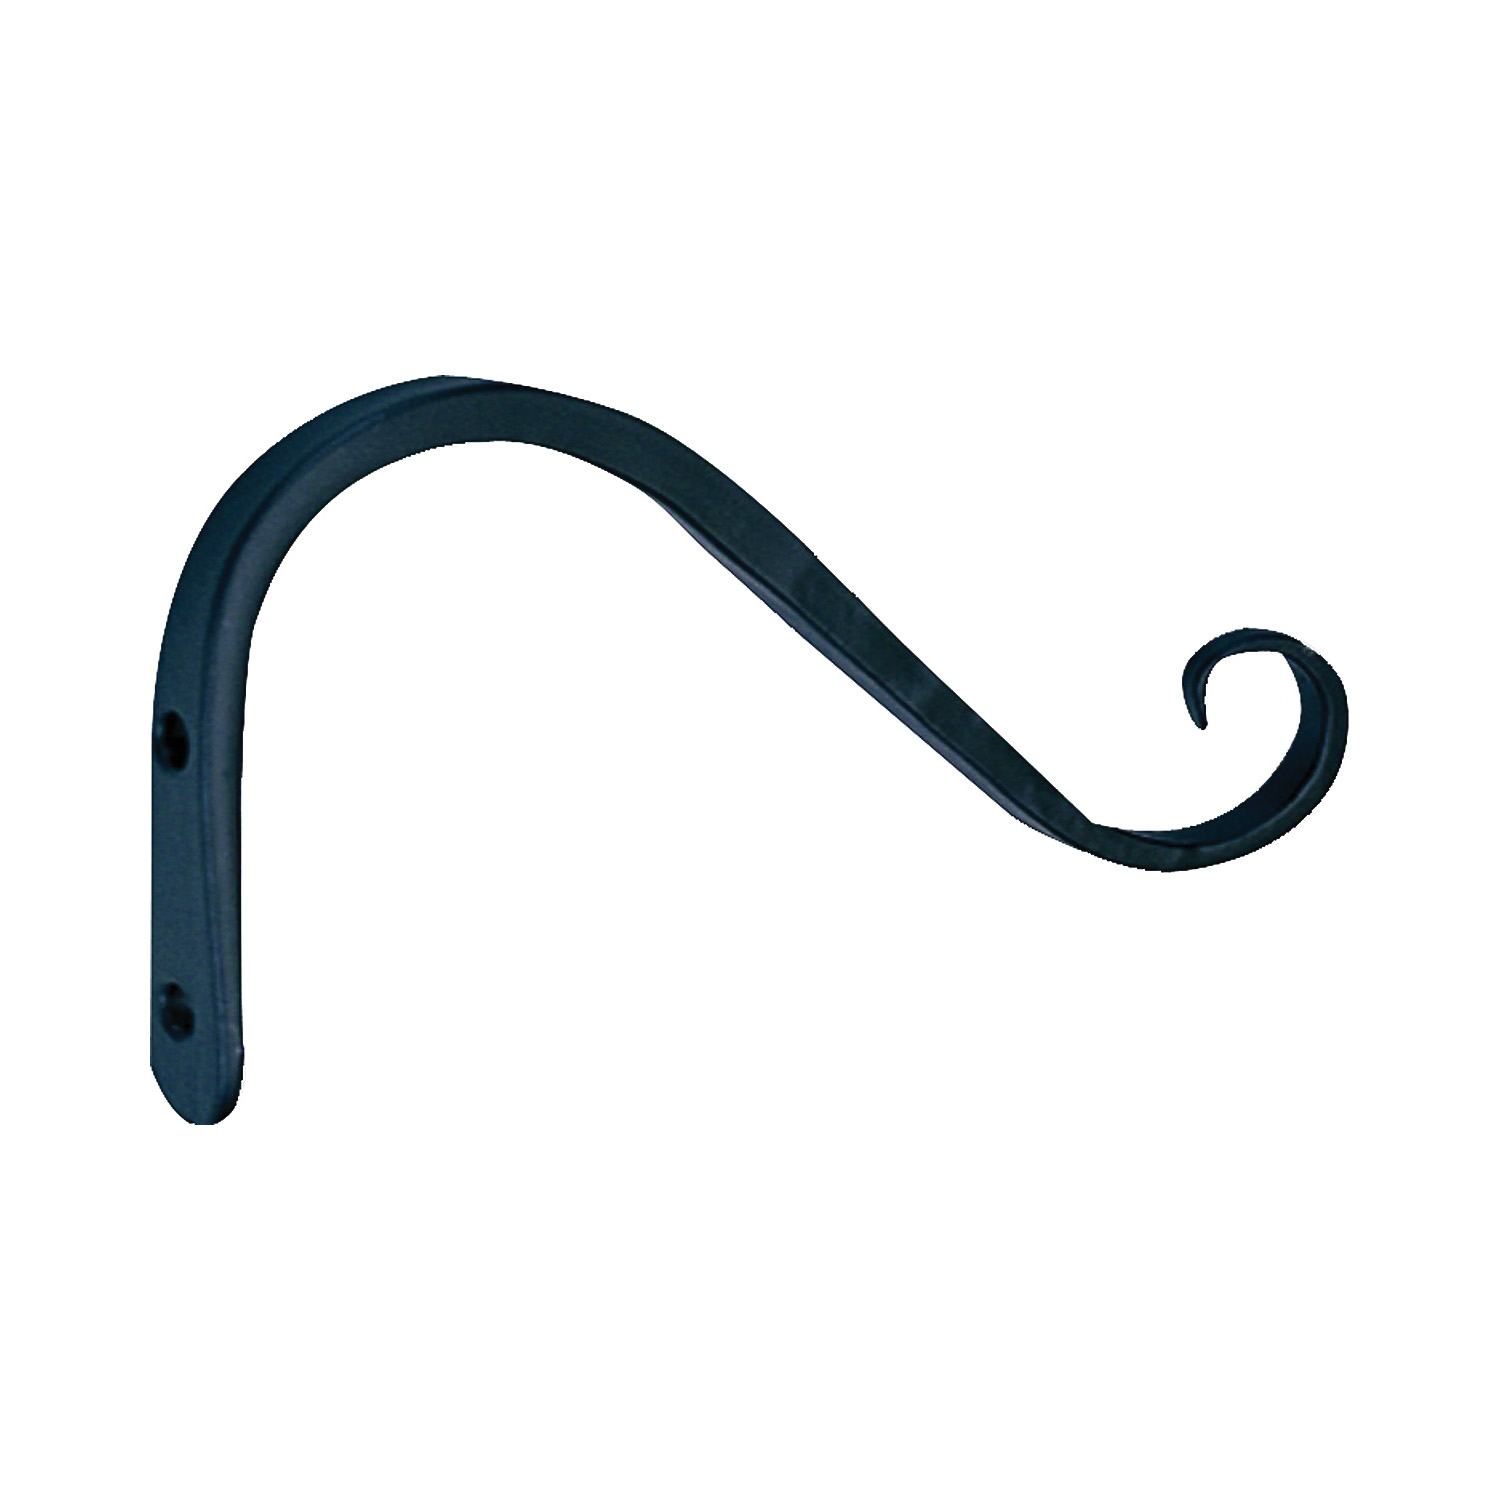 GB-3021 Hanging Plant Hook, 5-3/4 in L, 3.5 in H, Steel, Matte Black, Wall Mount Mounting